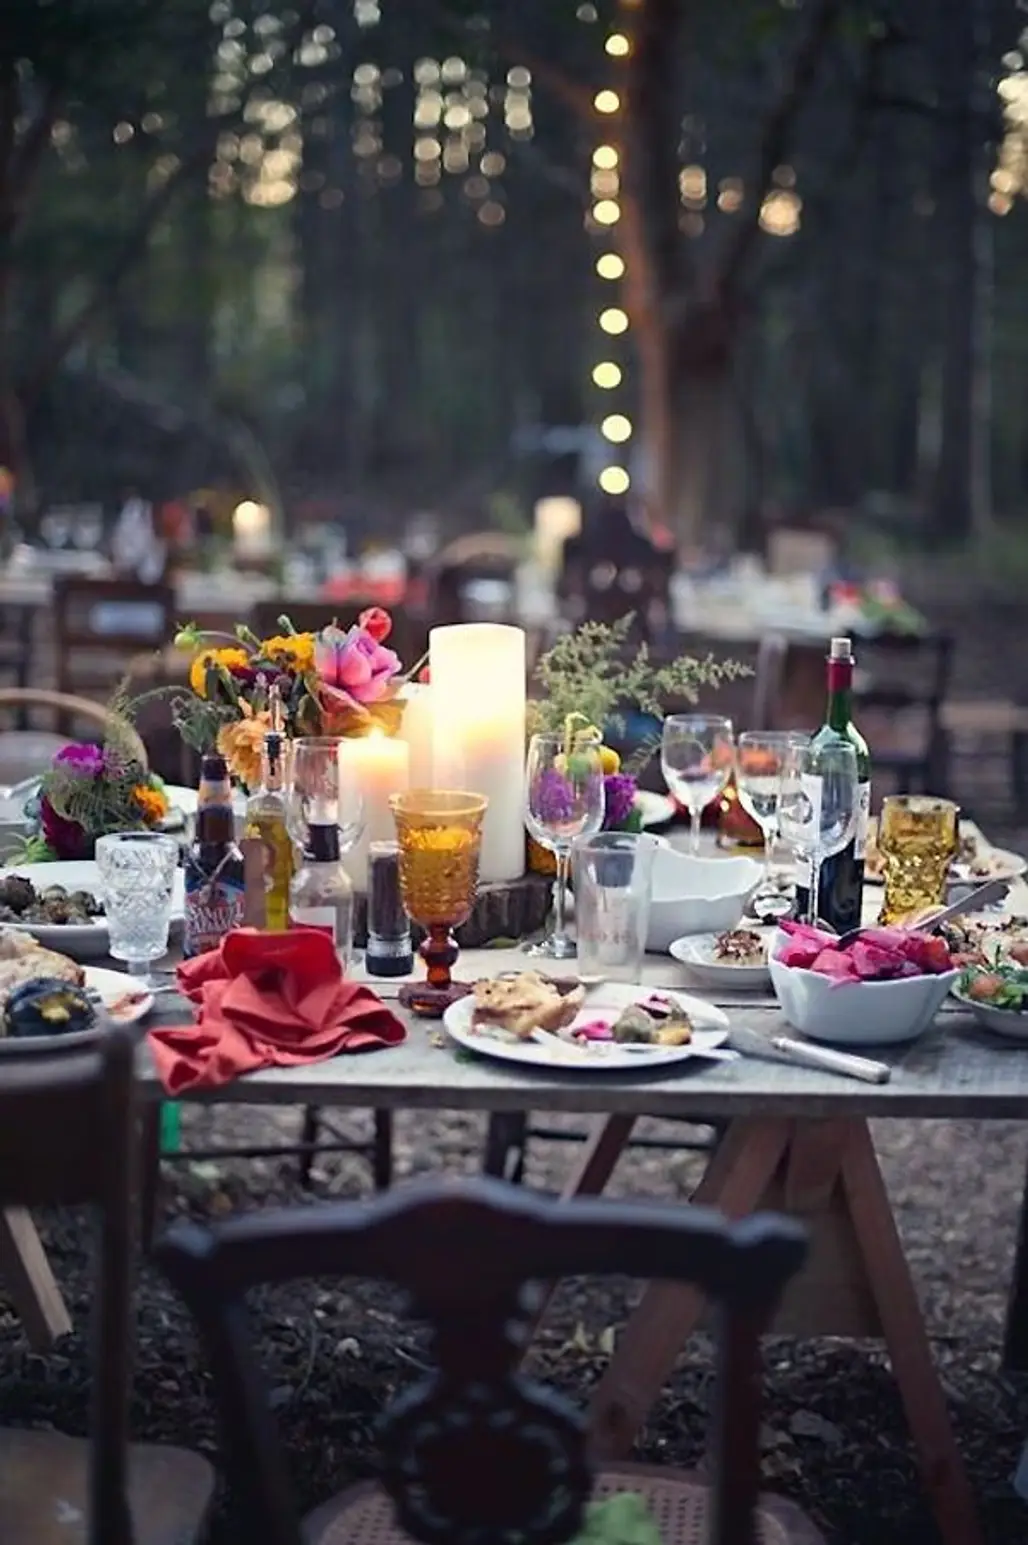 Make the Table Pretty with Flower Arrangements